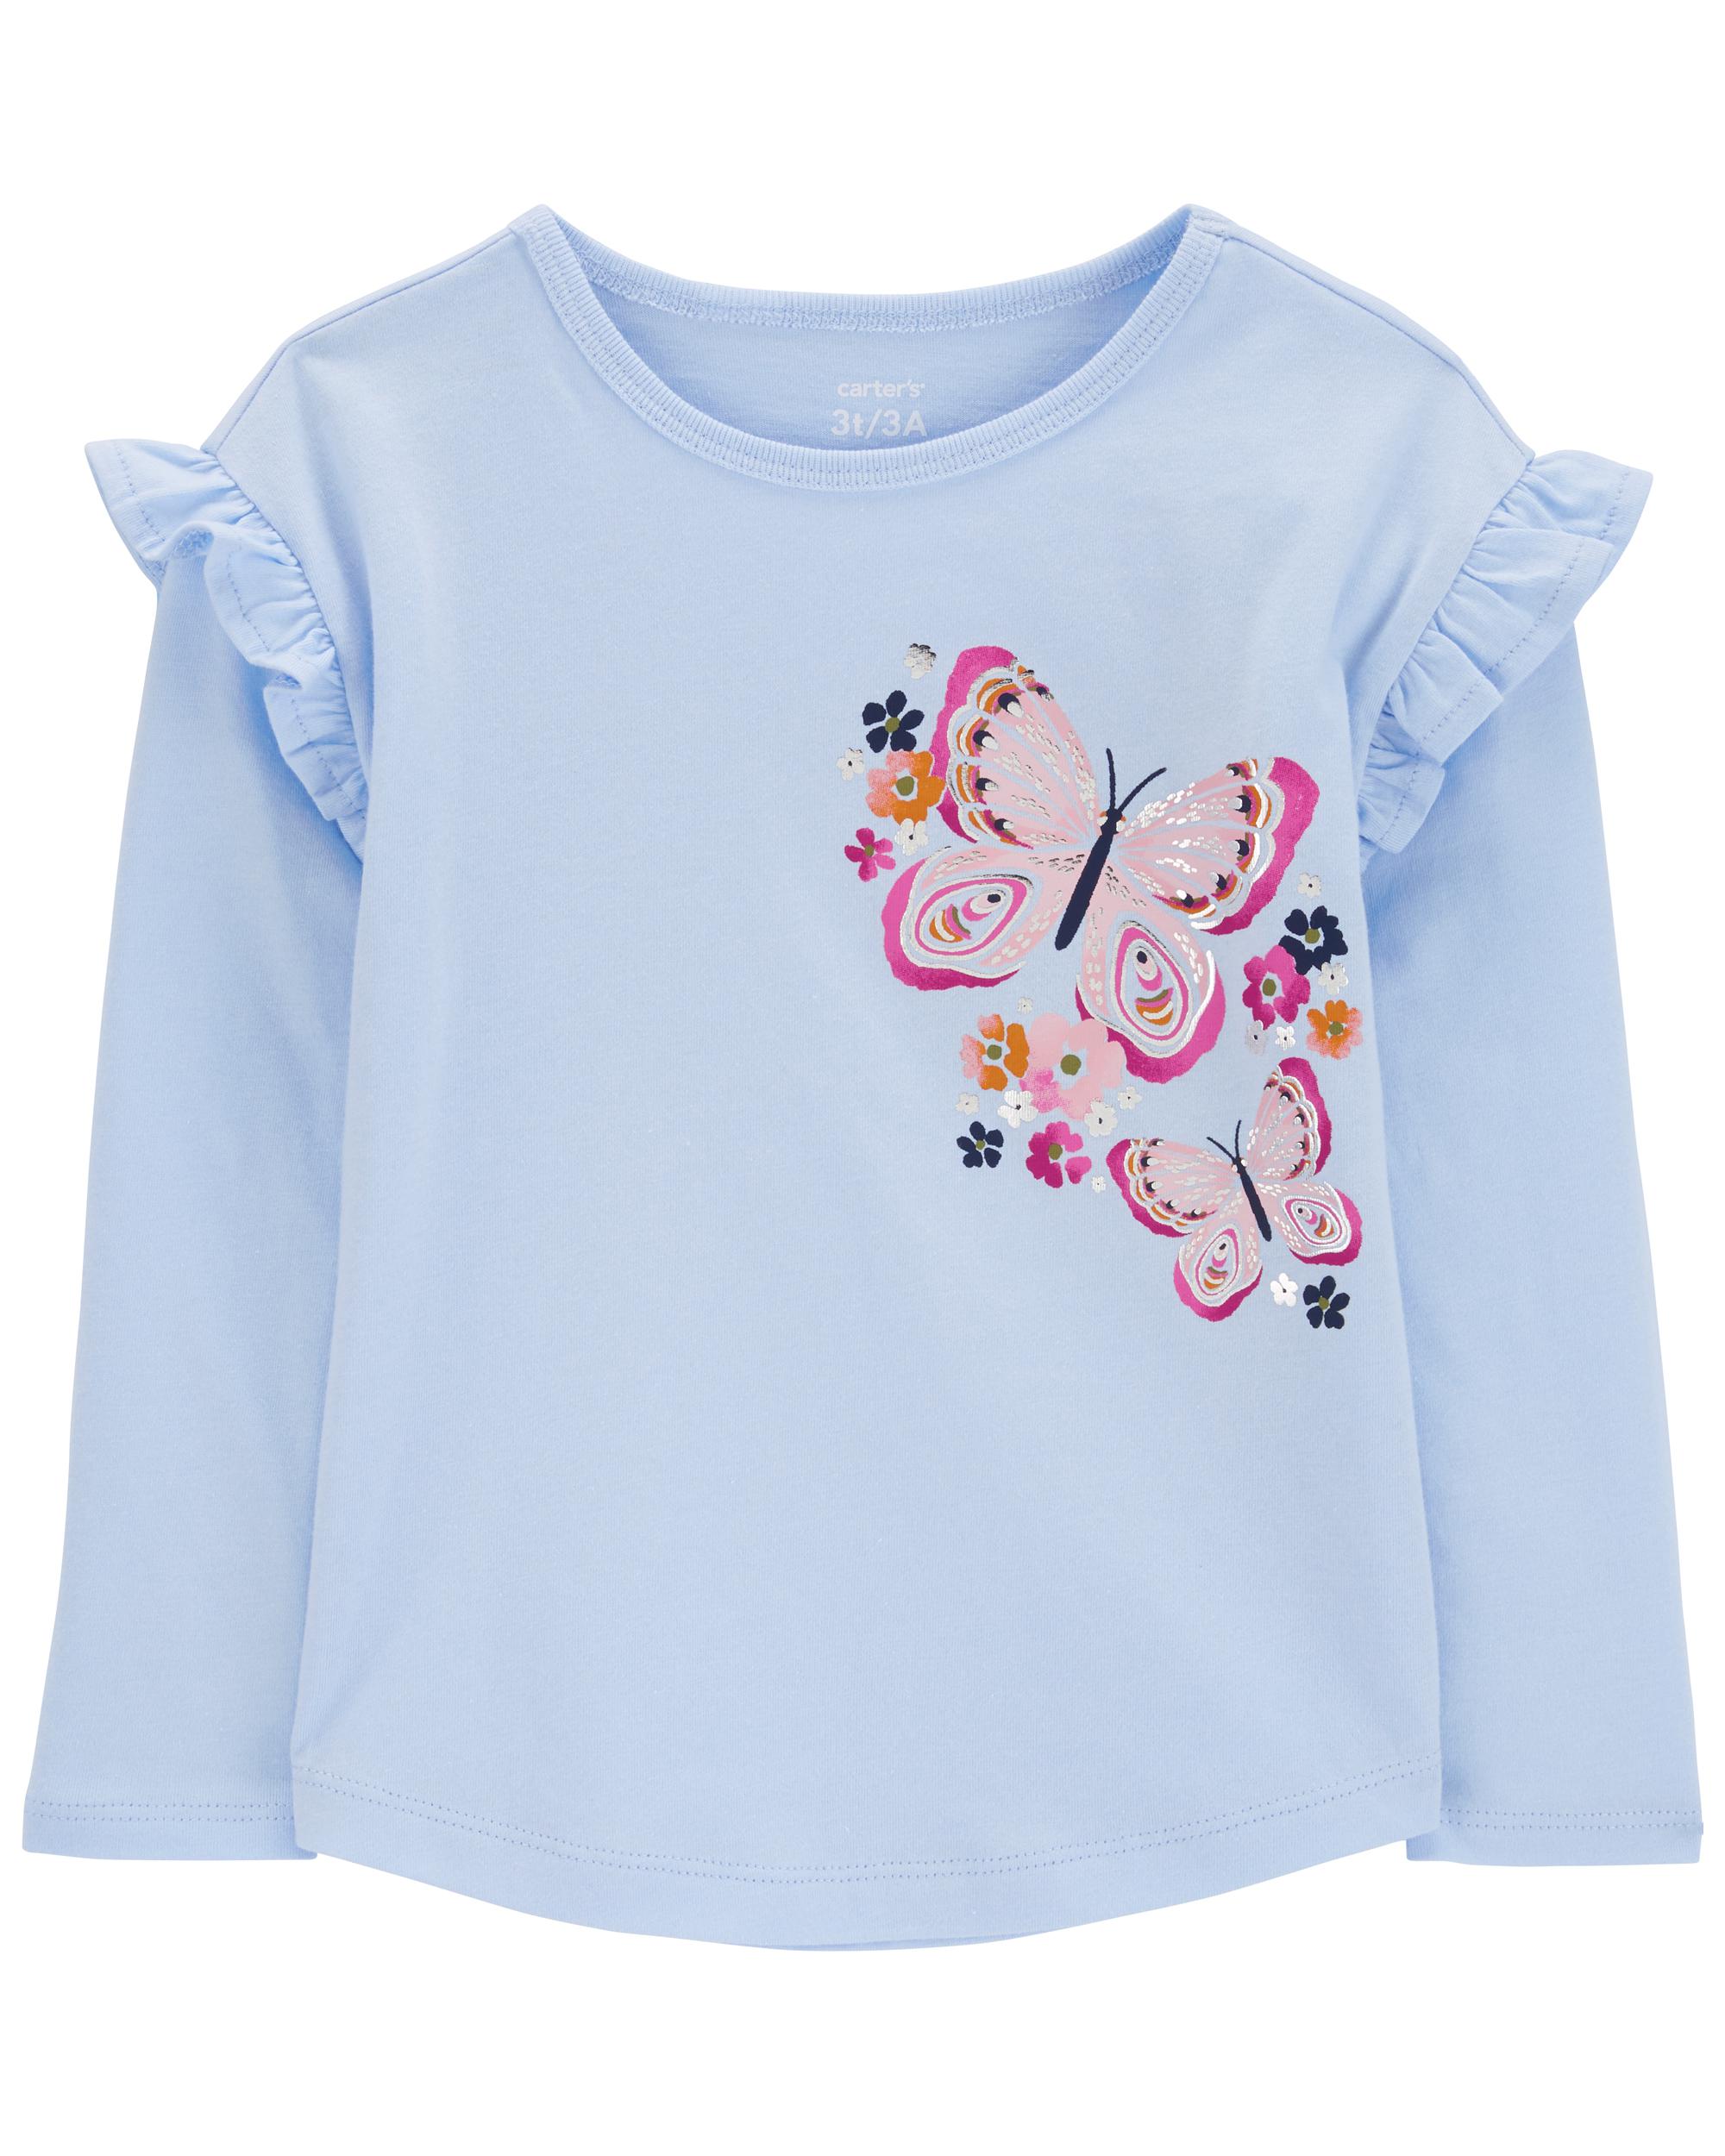 Baby Butterfly Flutter Graphic T-Shirt